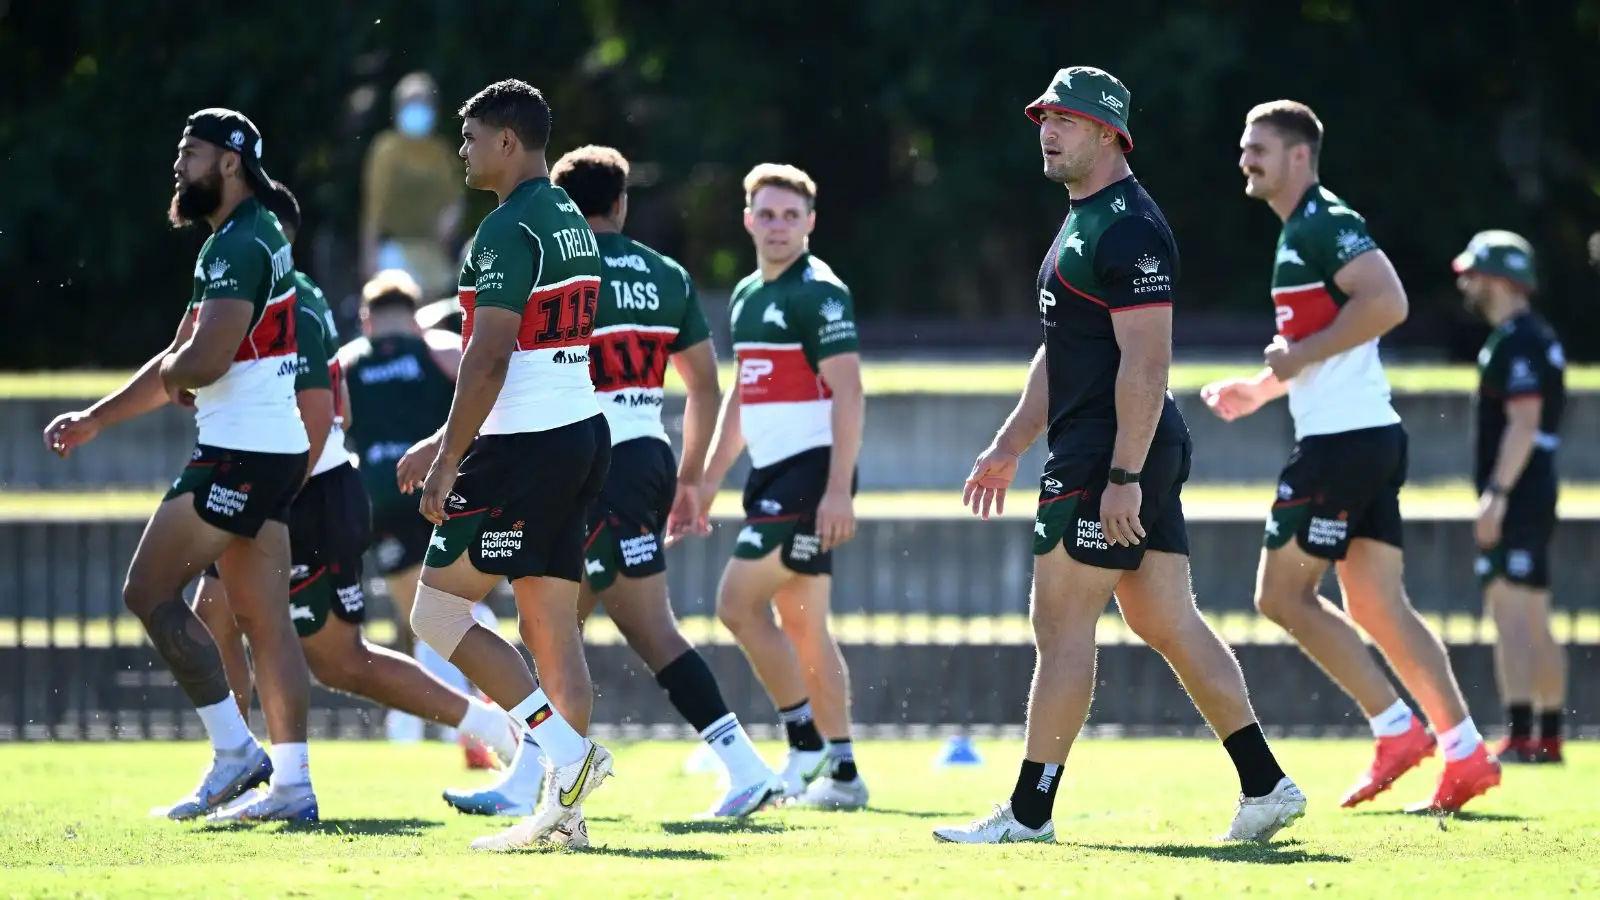 Sam Burgess ‘frontrunner’ for Warrington Wolves job as South Sydney Rabbitohs prepare to lose assistant – Australian reports